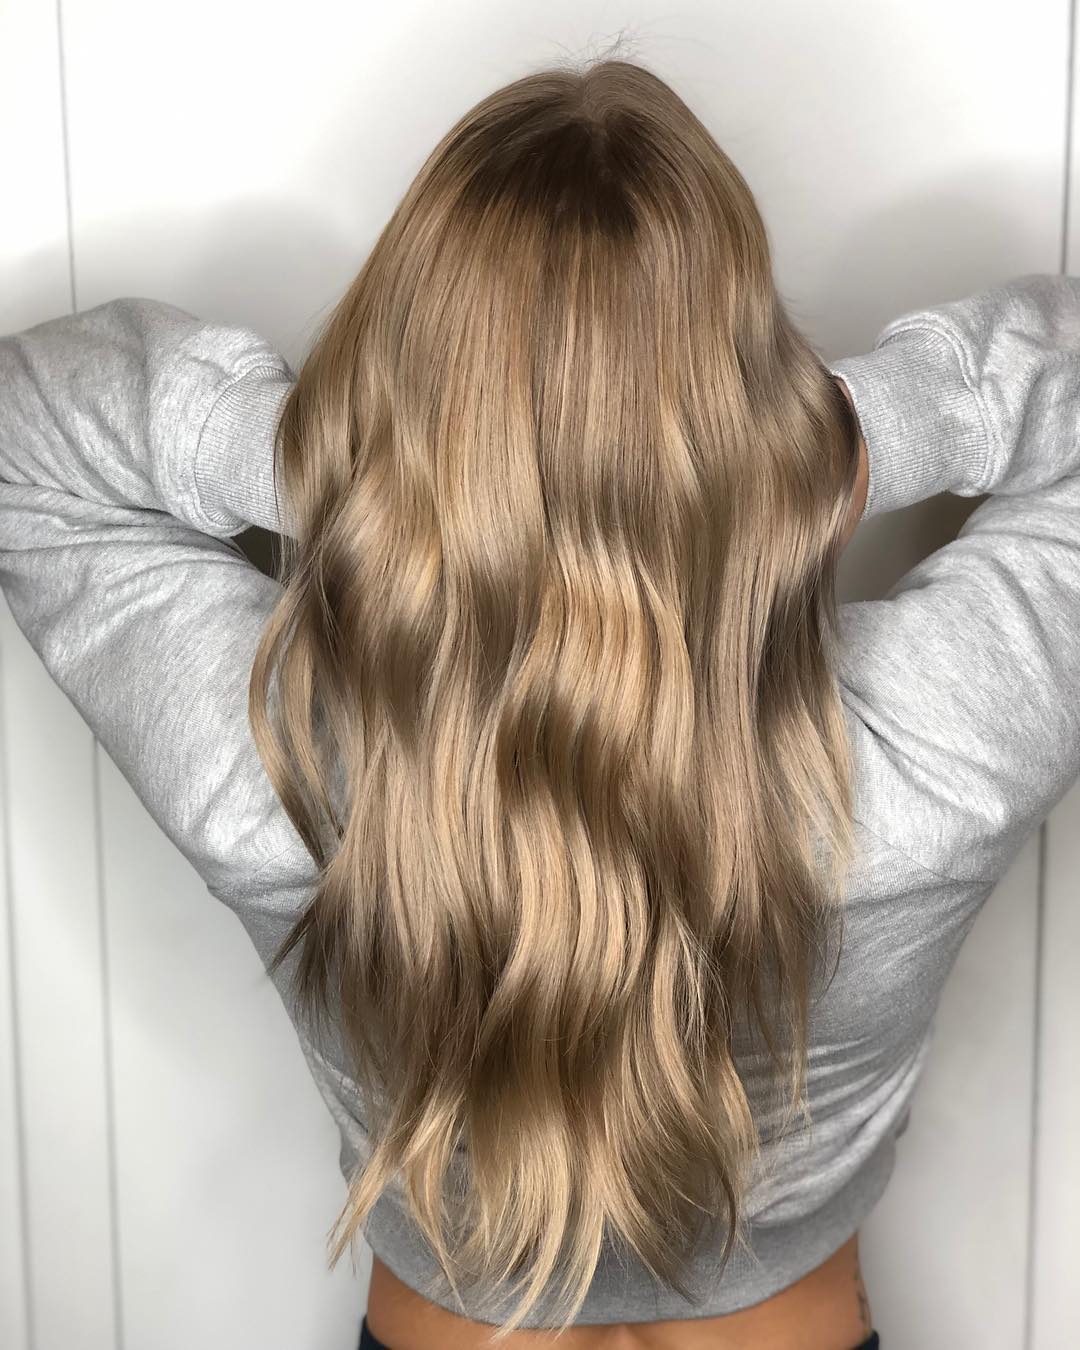 Dirty Blonde Hair Is The Low Maintenance Trend Every Lady Needs